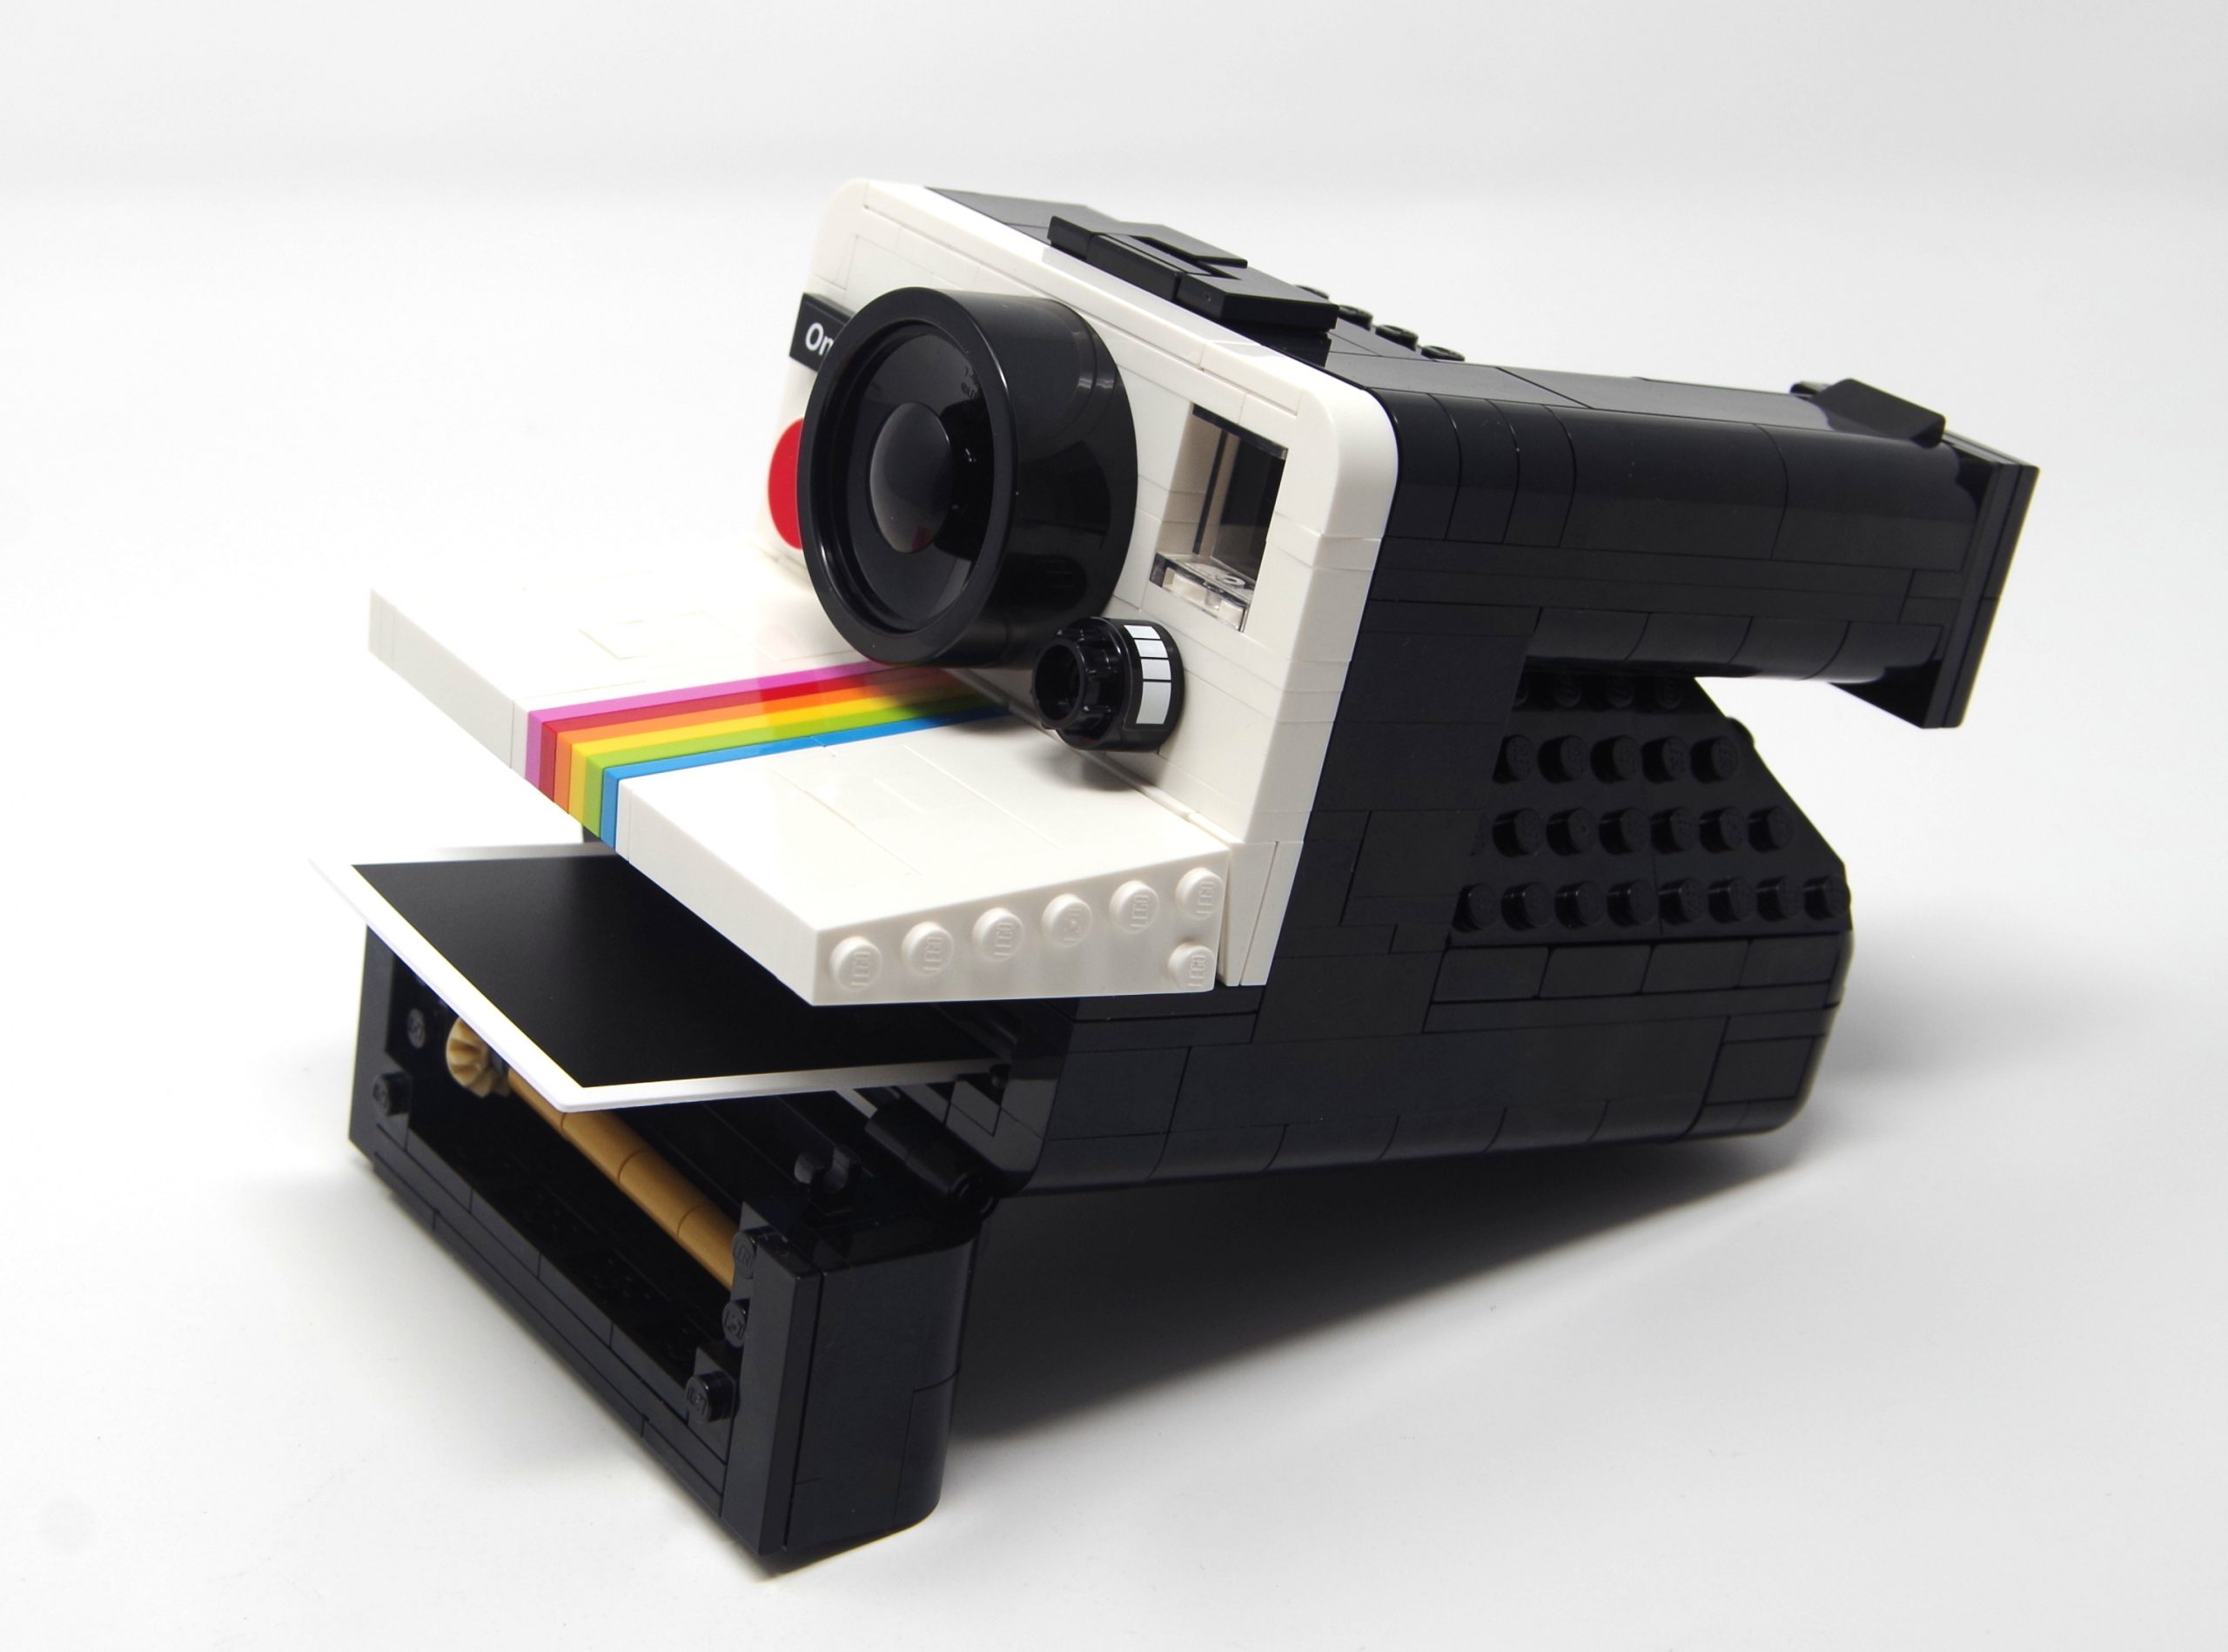 We've been toying with an official Lego Polaroid. It's literally a fan